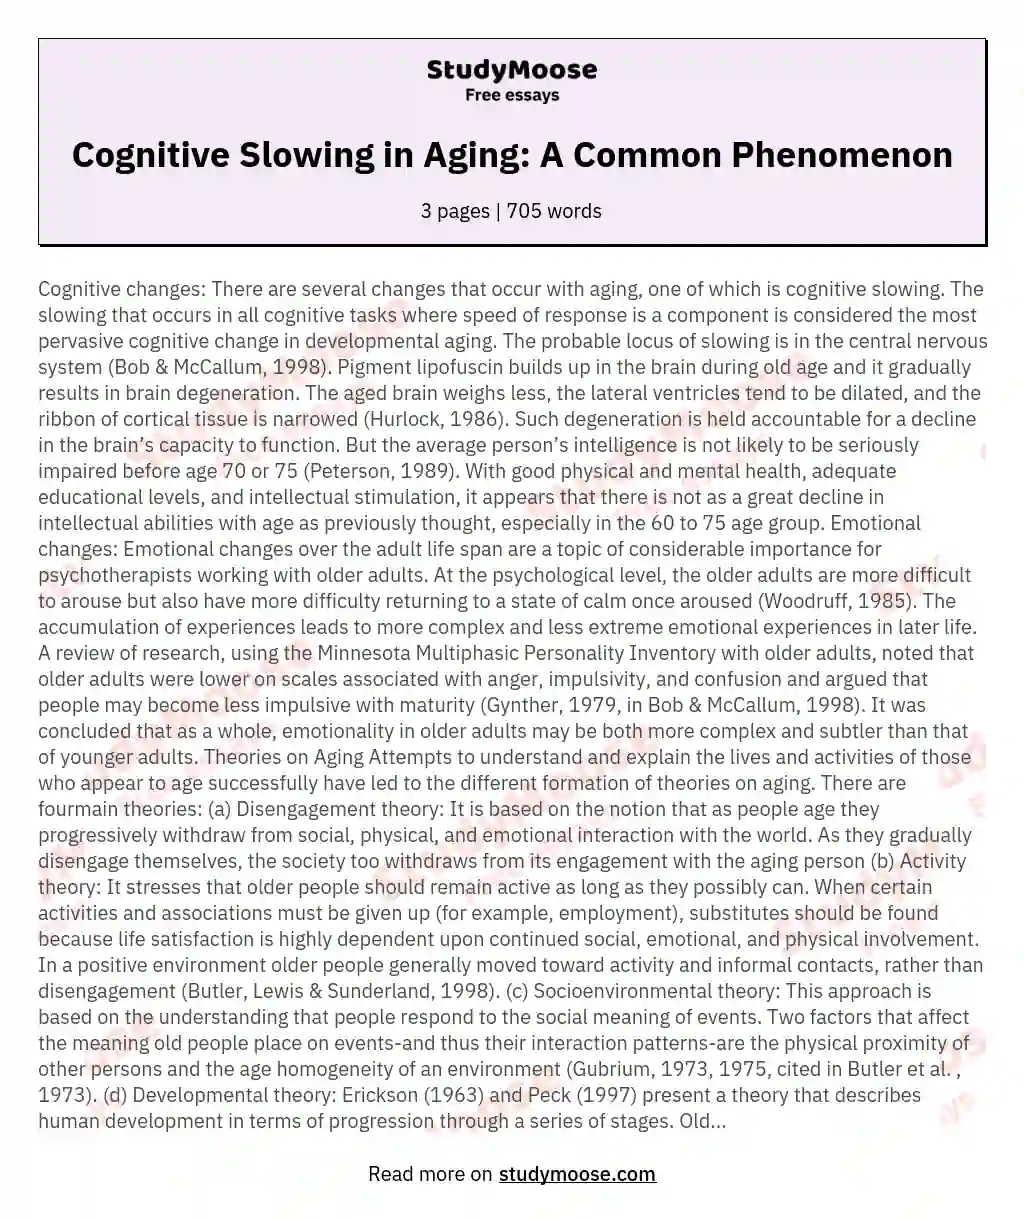 Cognitive Slowing in Aging: A Common Phenomenon essay